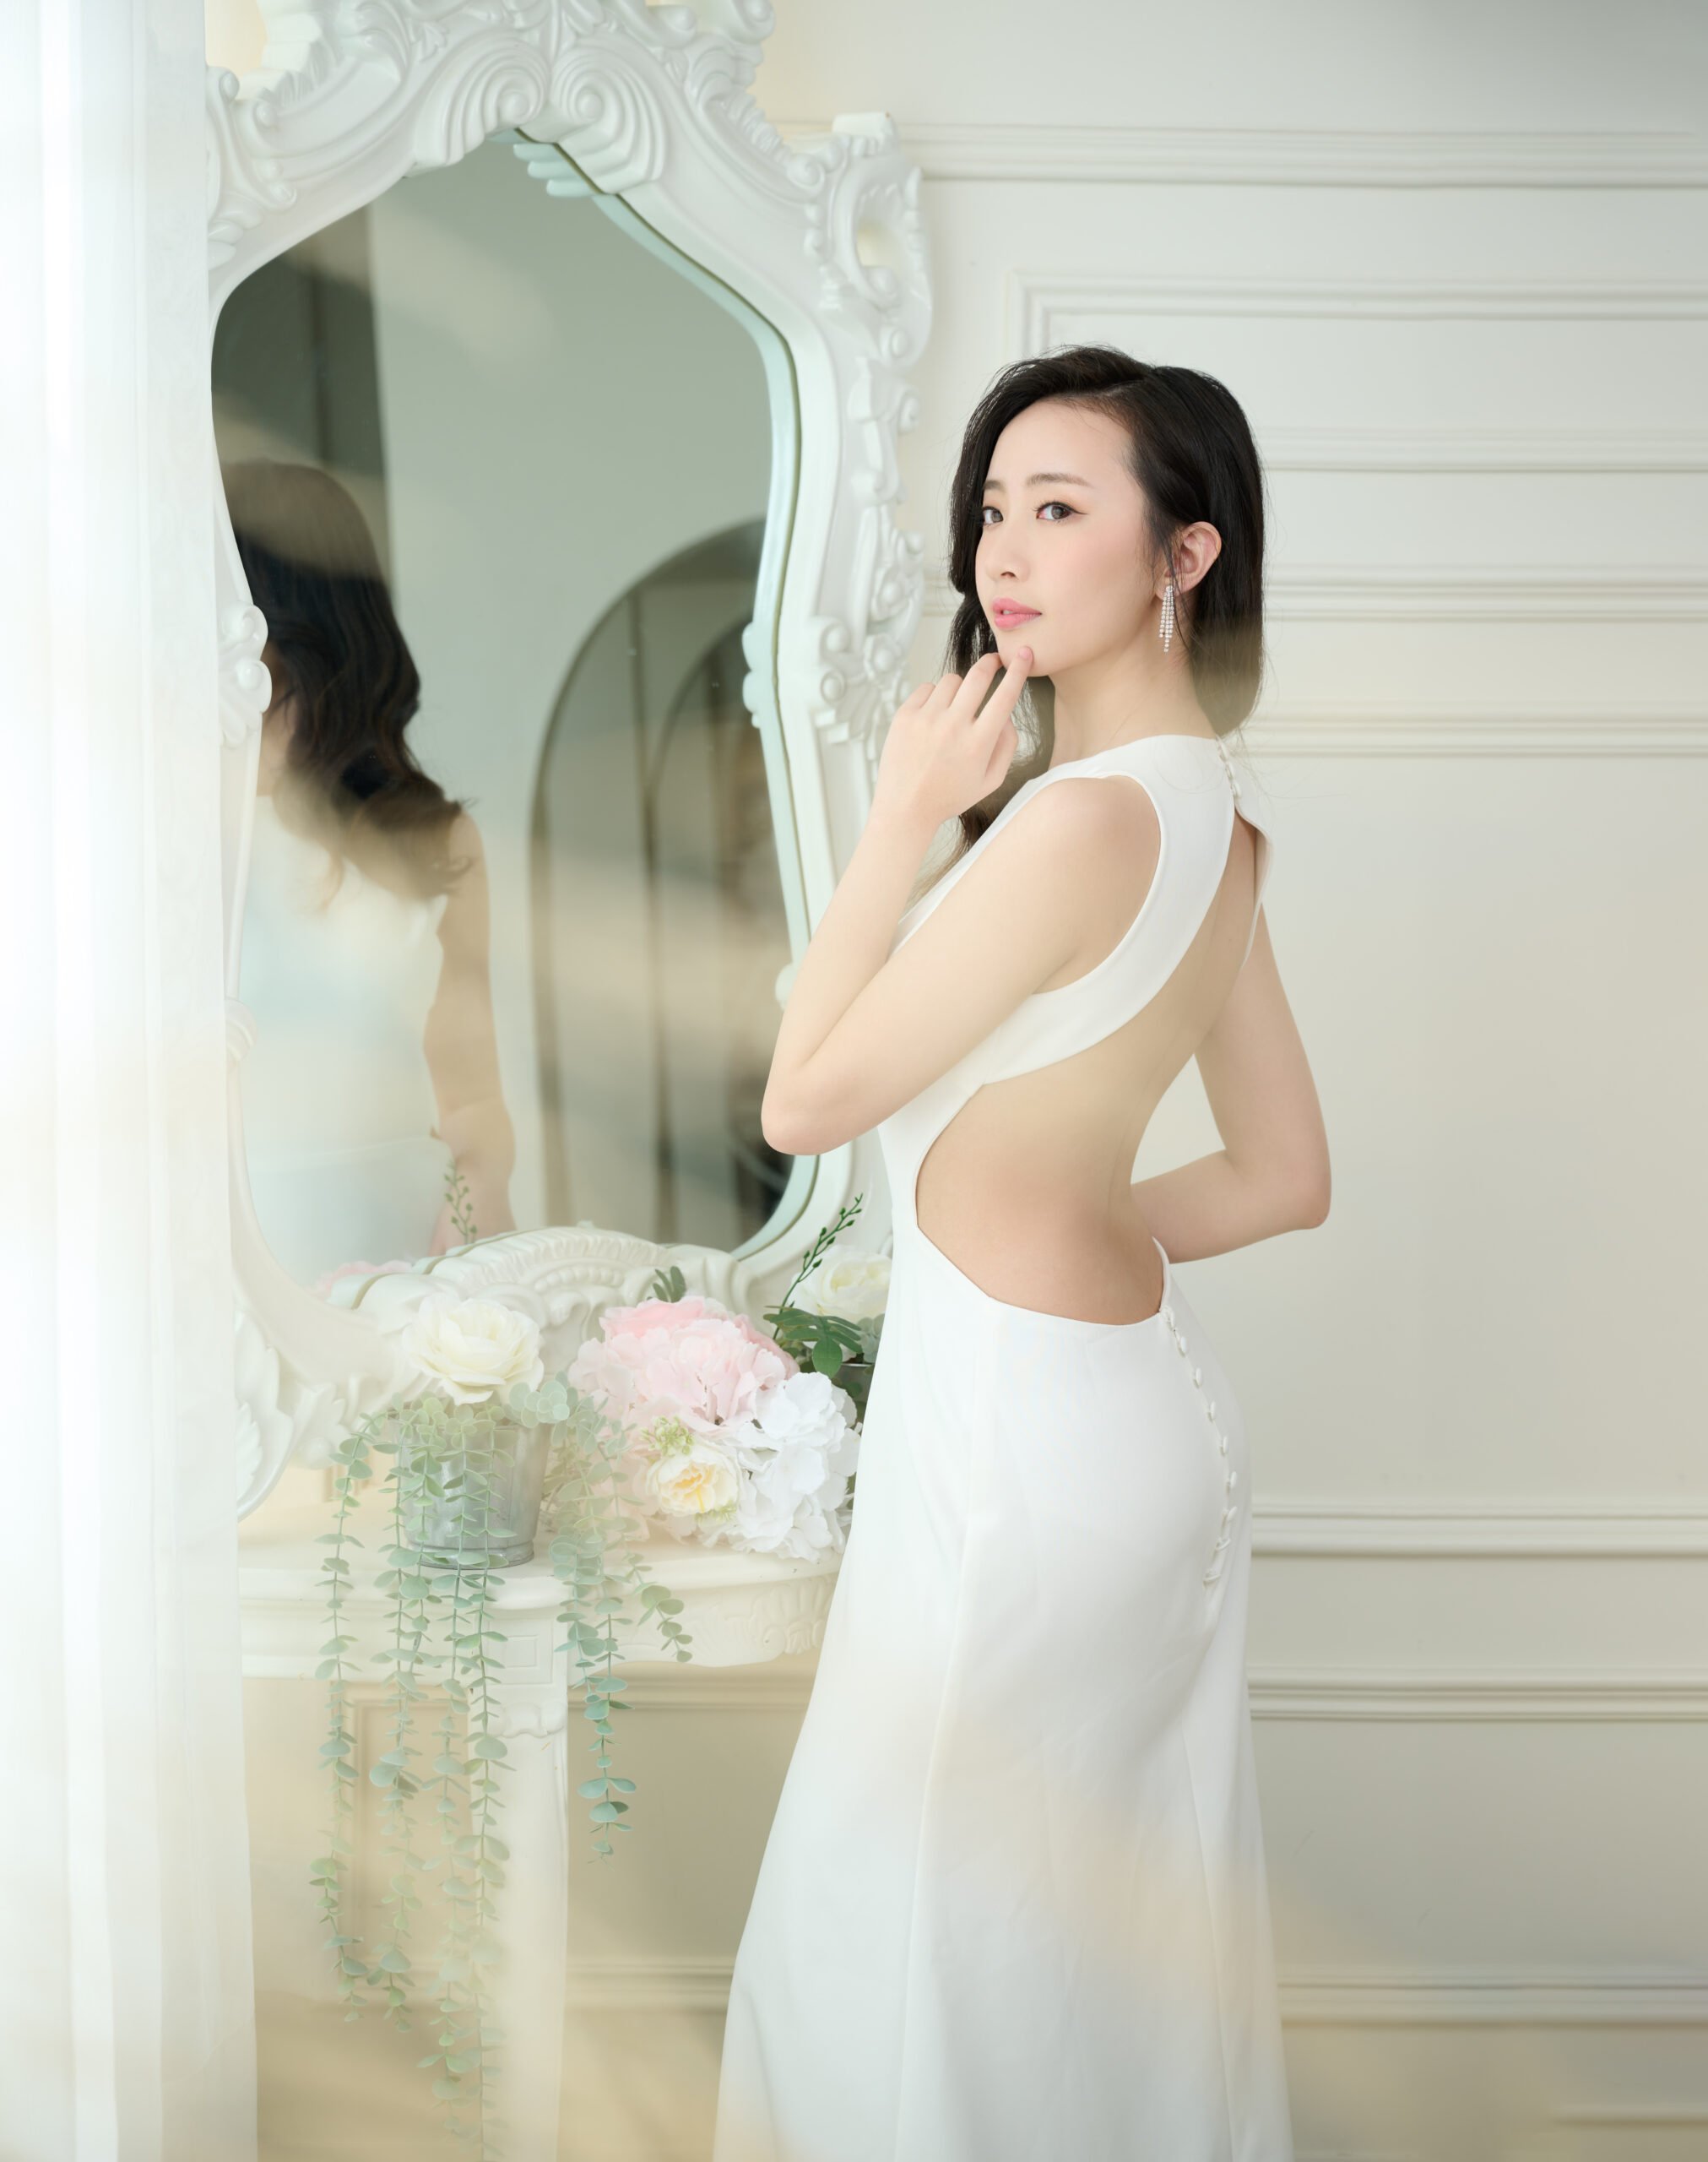 Rent Sara, the modern and sleek wedding dress designed to make you feel confident and beautiful. With a high halter neckline, intricate button back, and daring side cutouts, this gown will turn heads.